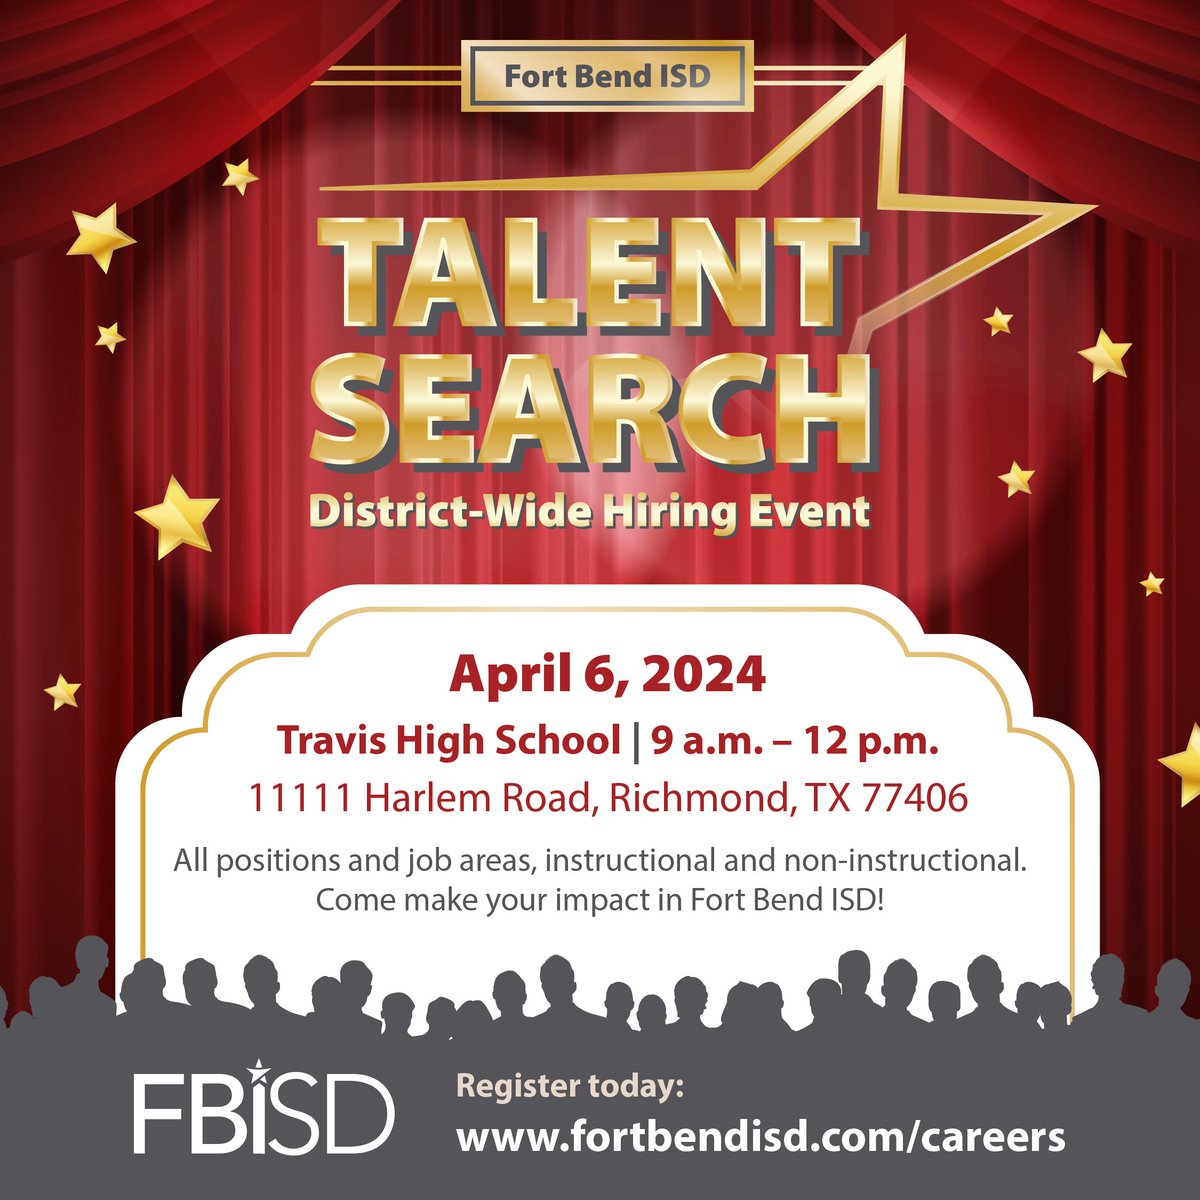 Fort Bend ISD is rolling out the red carpet for candidates who want to join our family! The 2024 Talent Search Hiring Event is scheduled for April 6 at @THS_Tigers. @FortBendISD offers teachers and other professionals daily opportunities to make a difference in students’ lives.